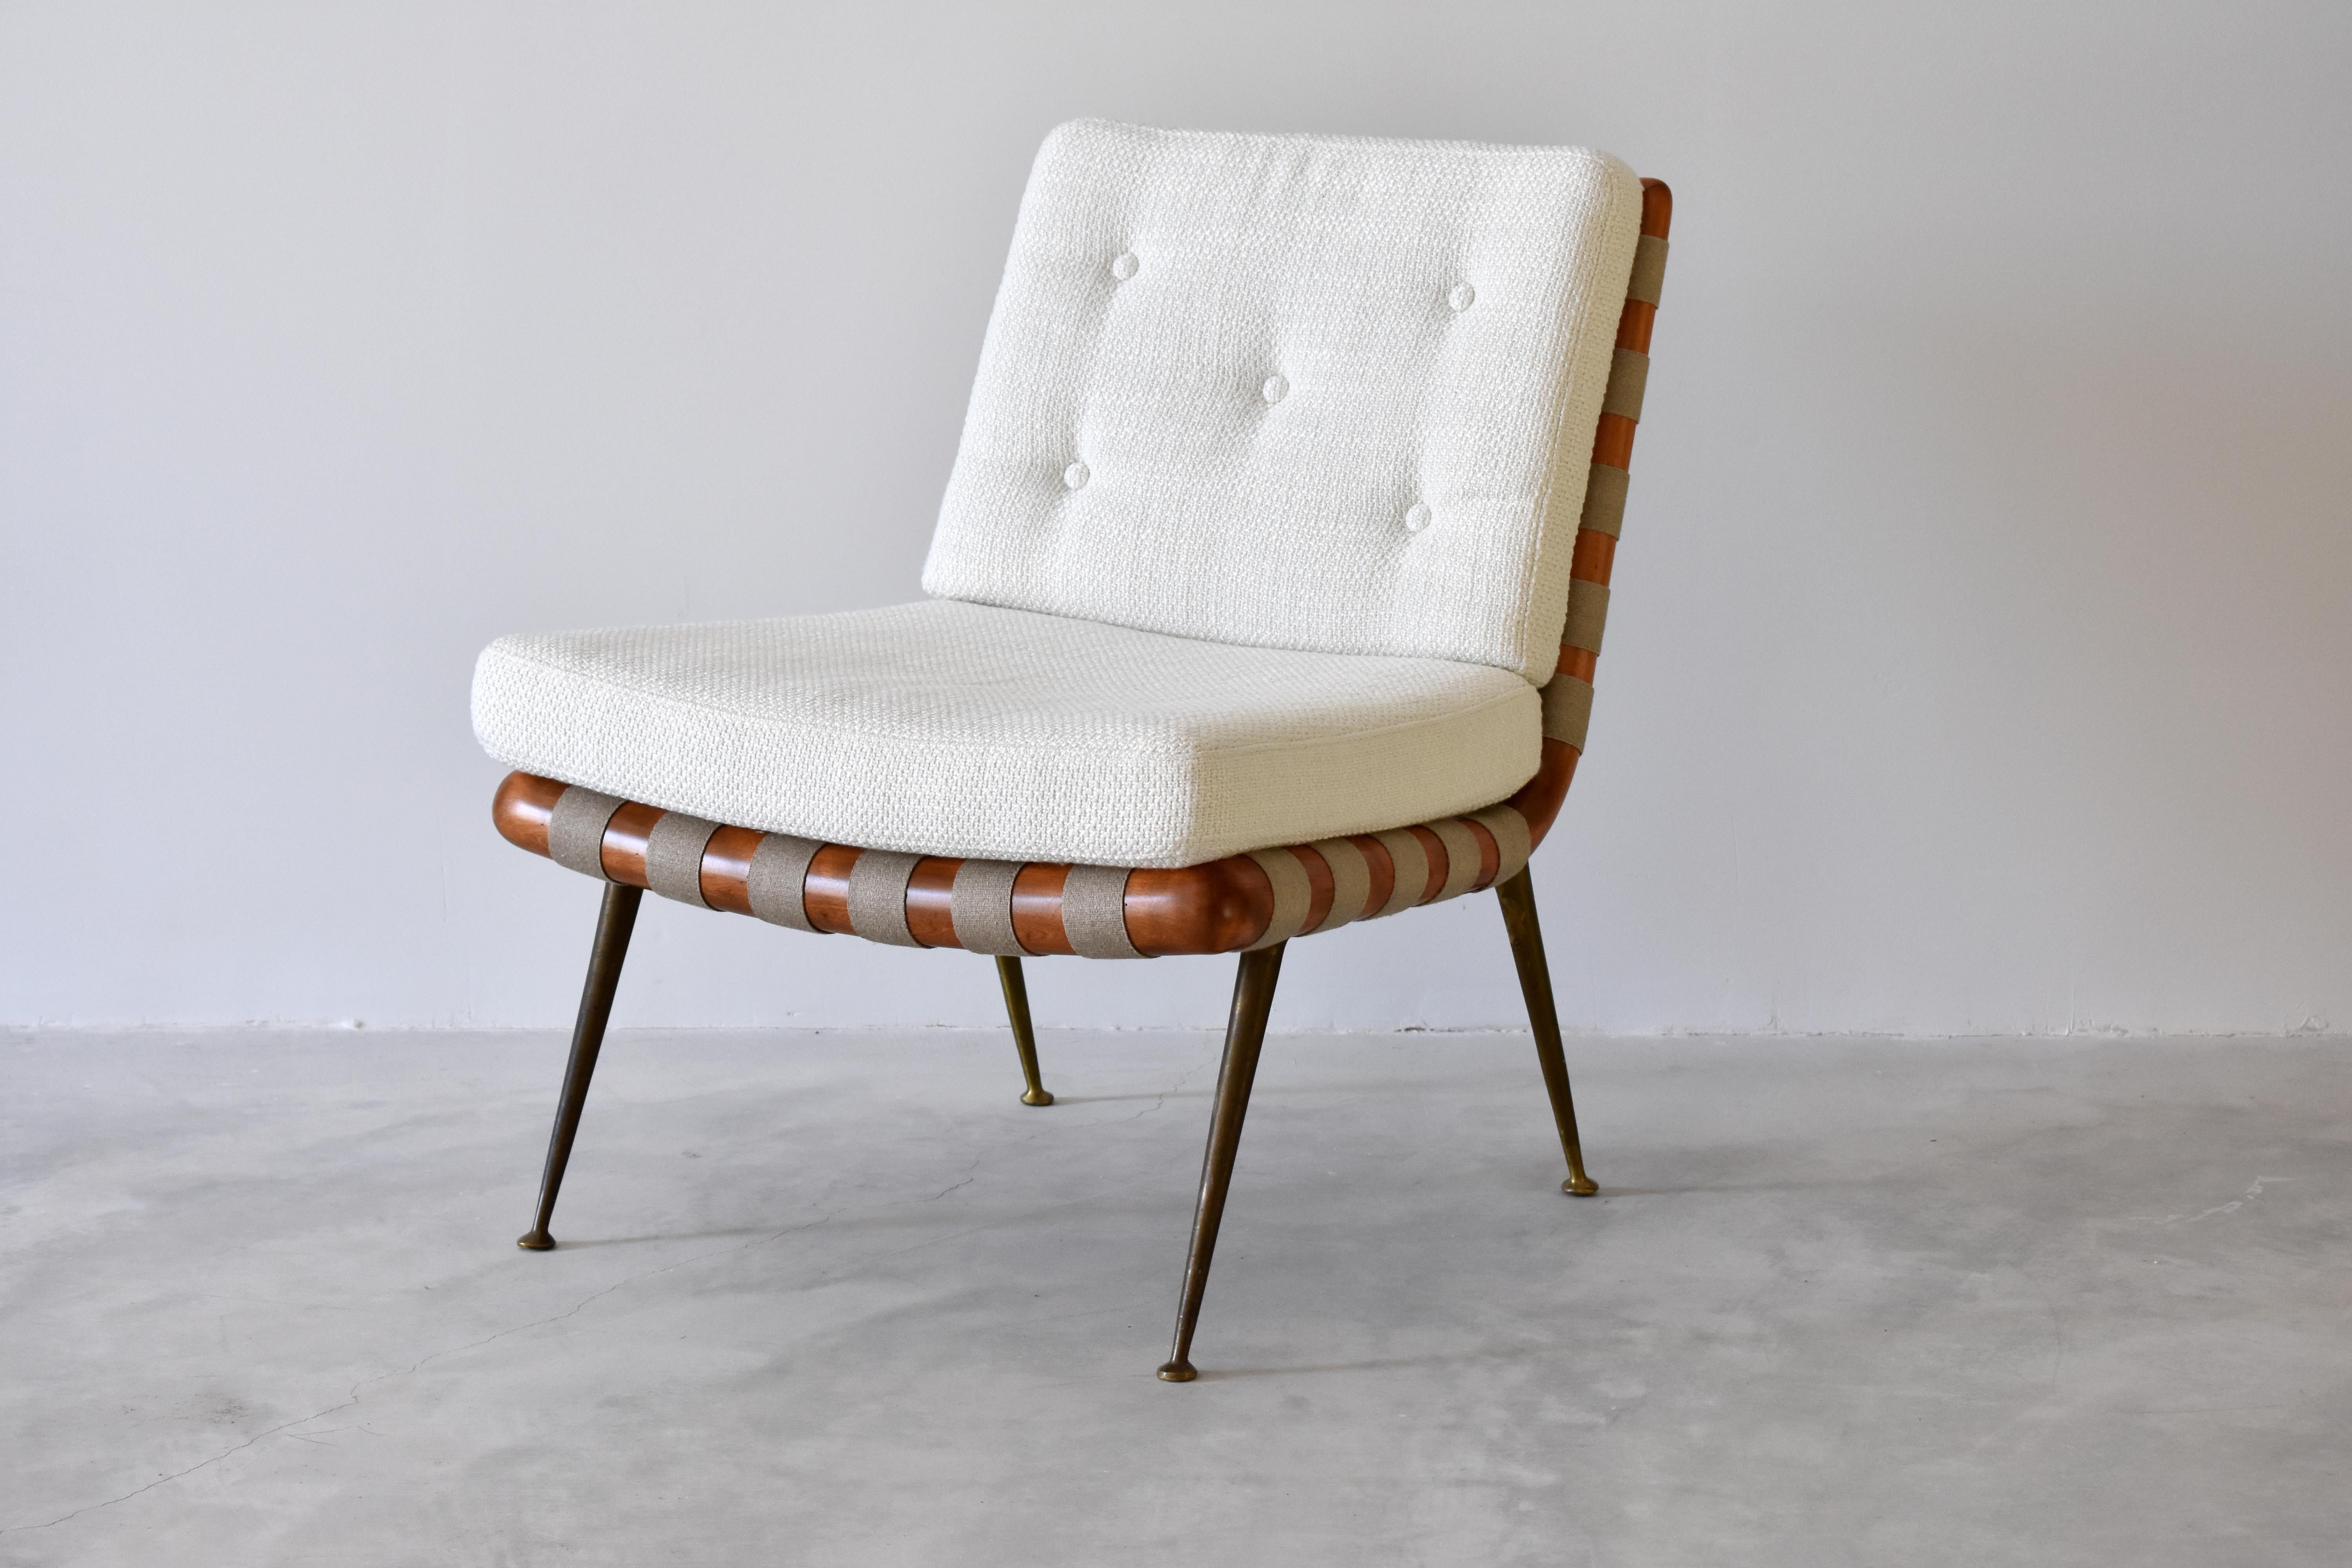 A rare lounge / cocktail / slipper chair designed by T.H. Robsjohn-Gibbings. The dark walnut and straps provide an elegant contrast to the off-white fabric and brass legs. Manufactured by The Widdicomb Furniture Company.

Work partly lends its